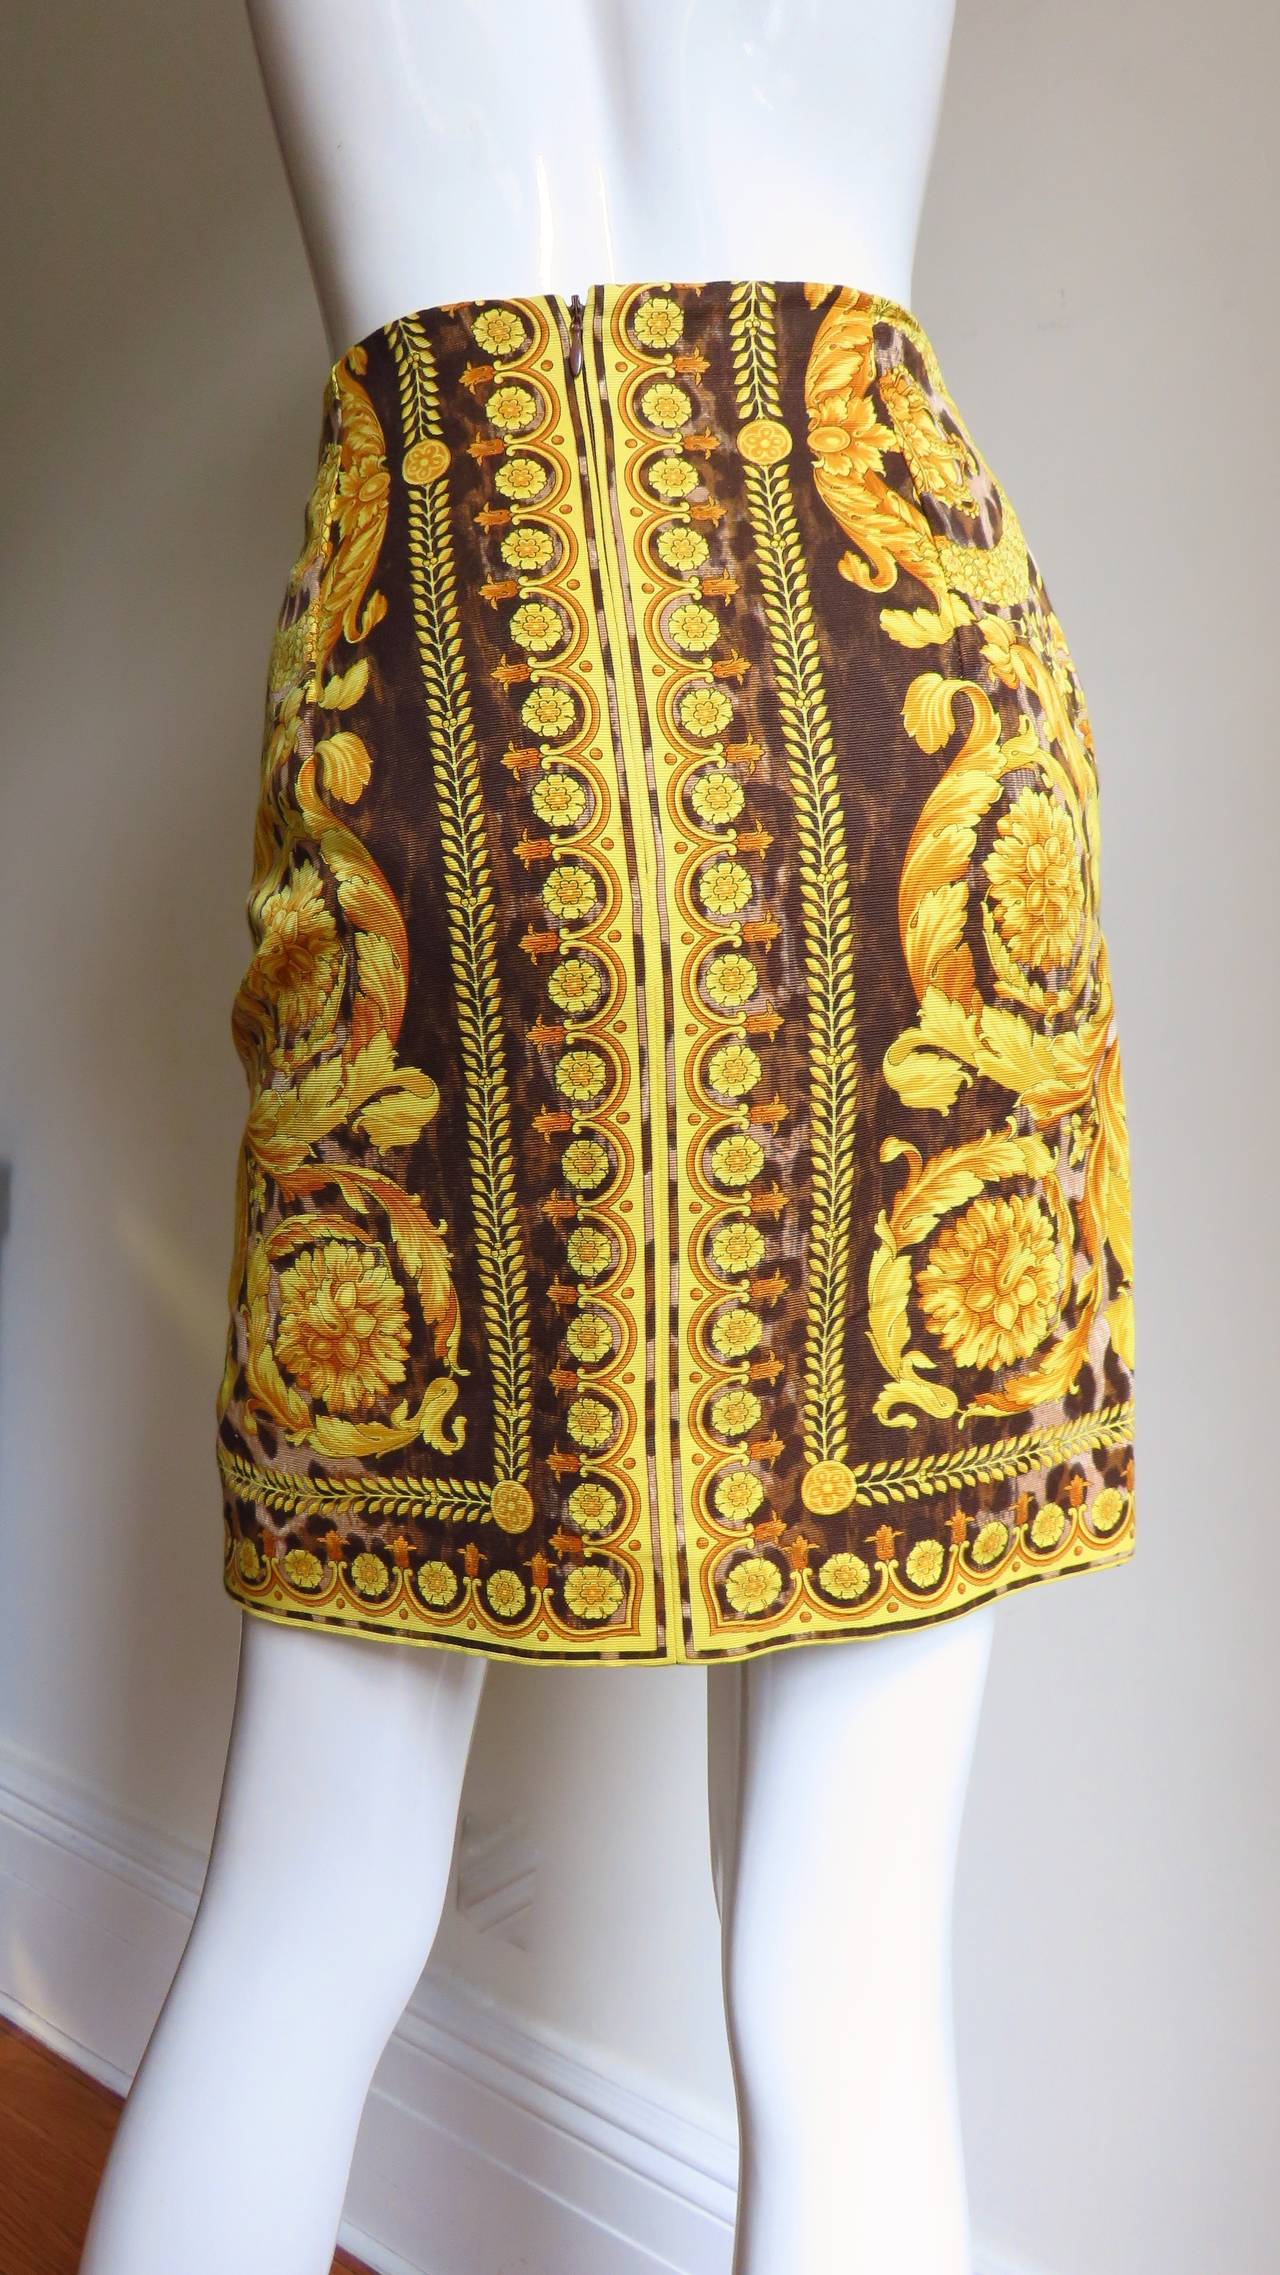  Gianni Versace Couture Leopard Baroque Print Skirt 1990s 1